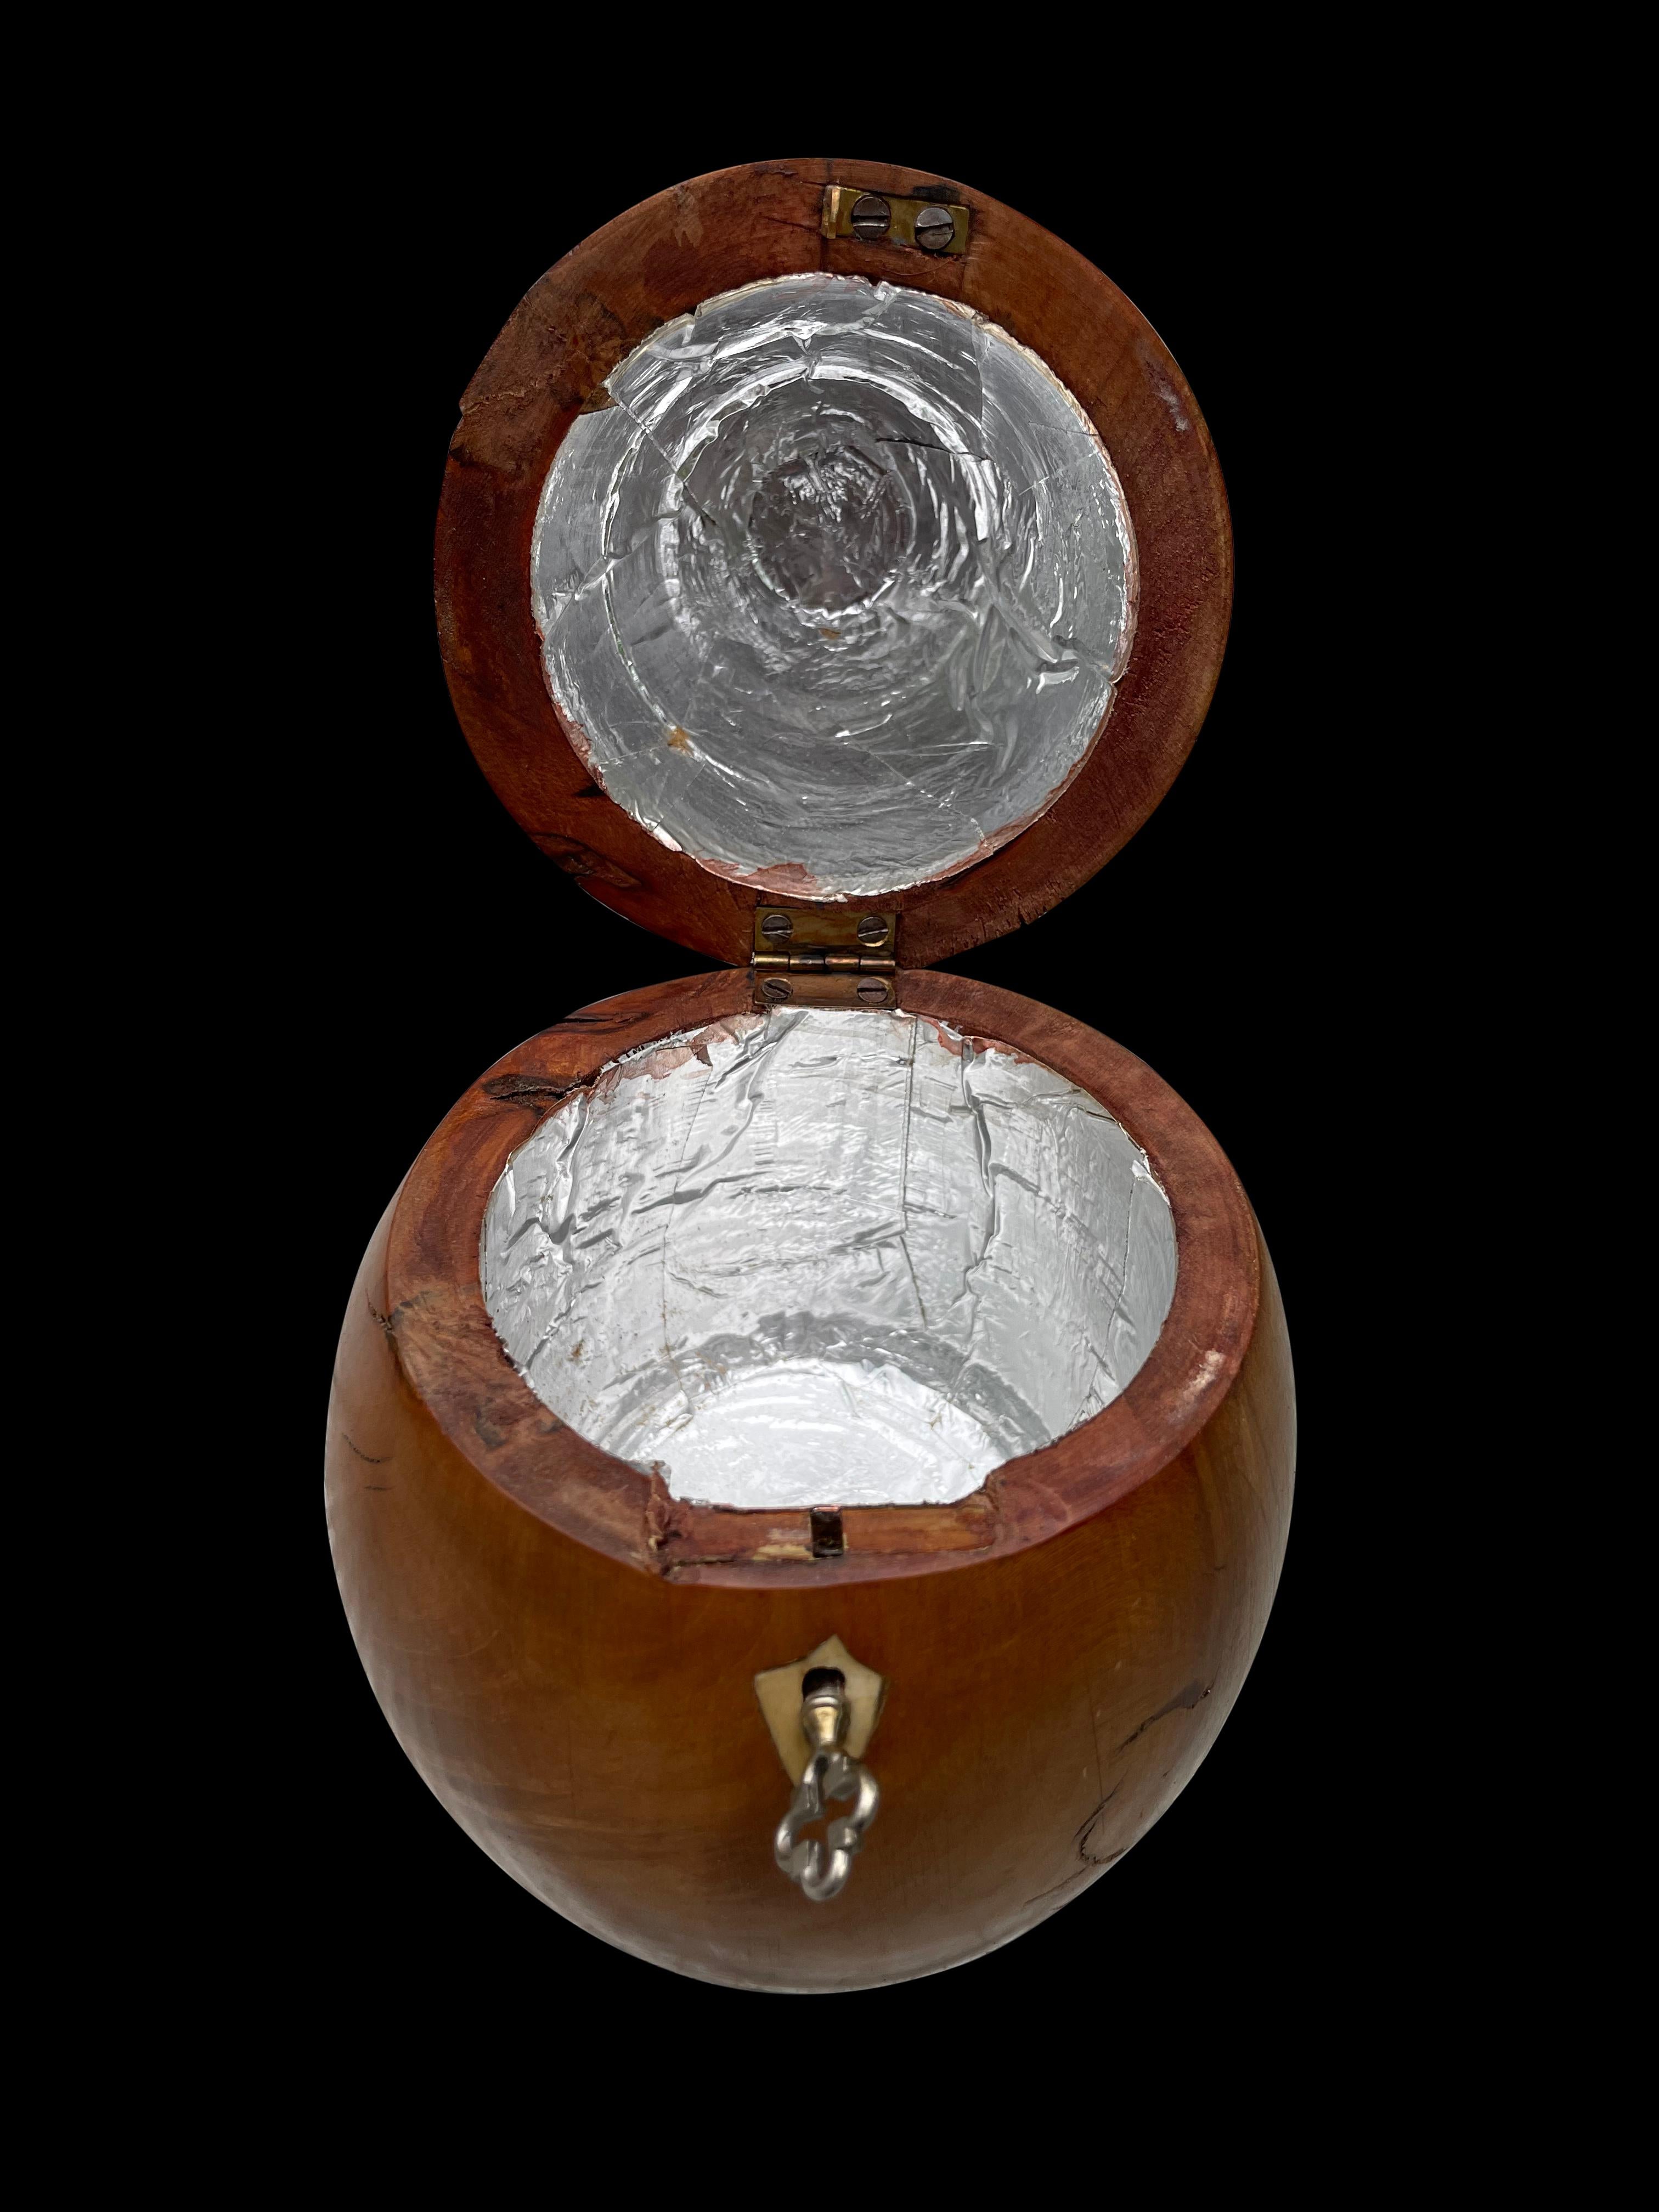 A superb George III fruitwood pear-shaped tea caddy late 18th century with a stem finial and metal escutcheon, opening to a void foil interior.

     